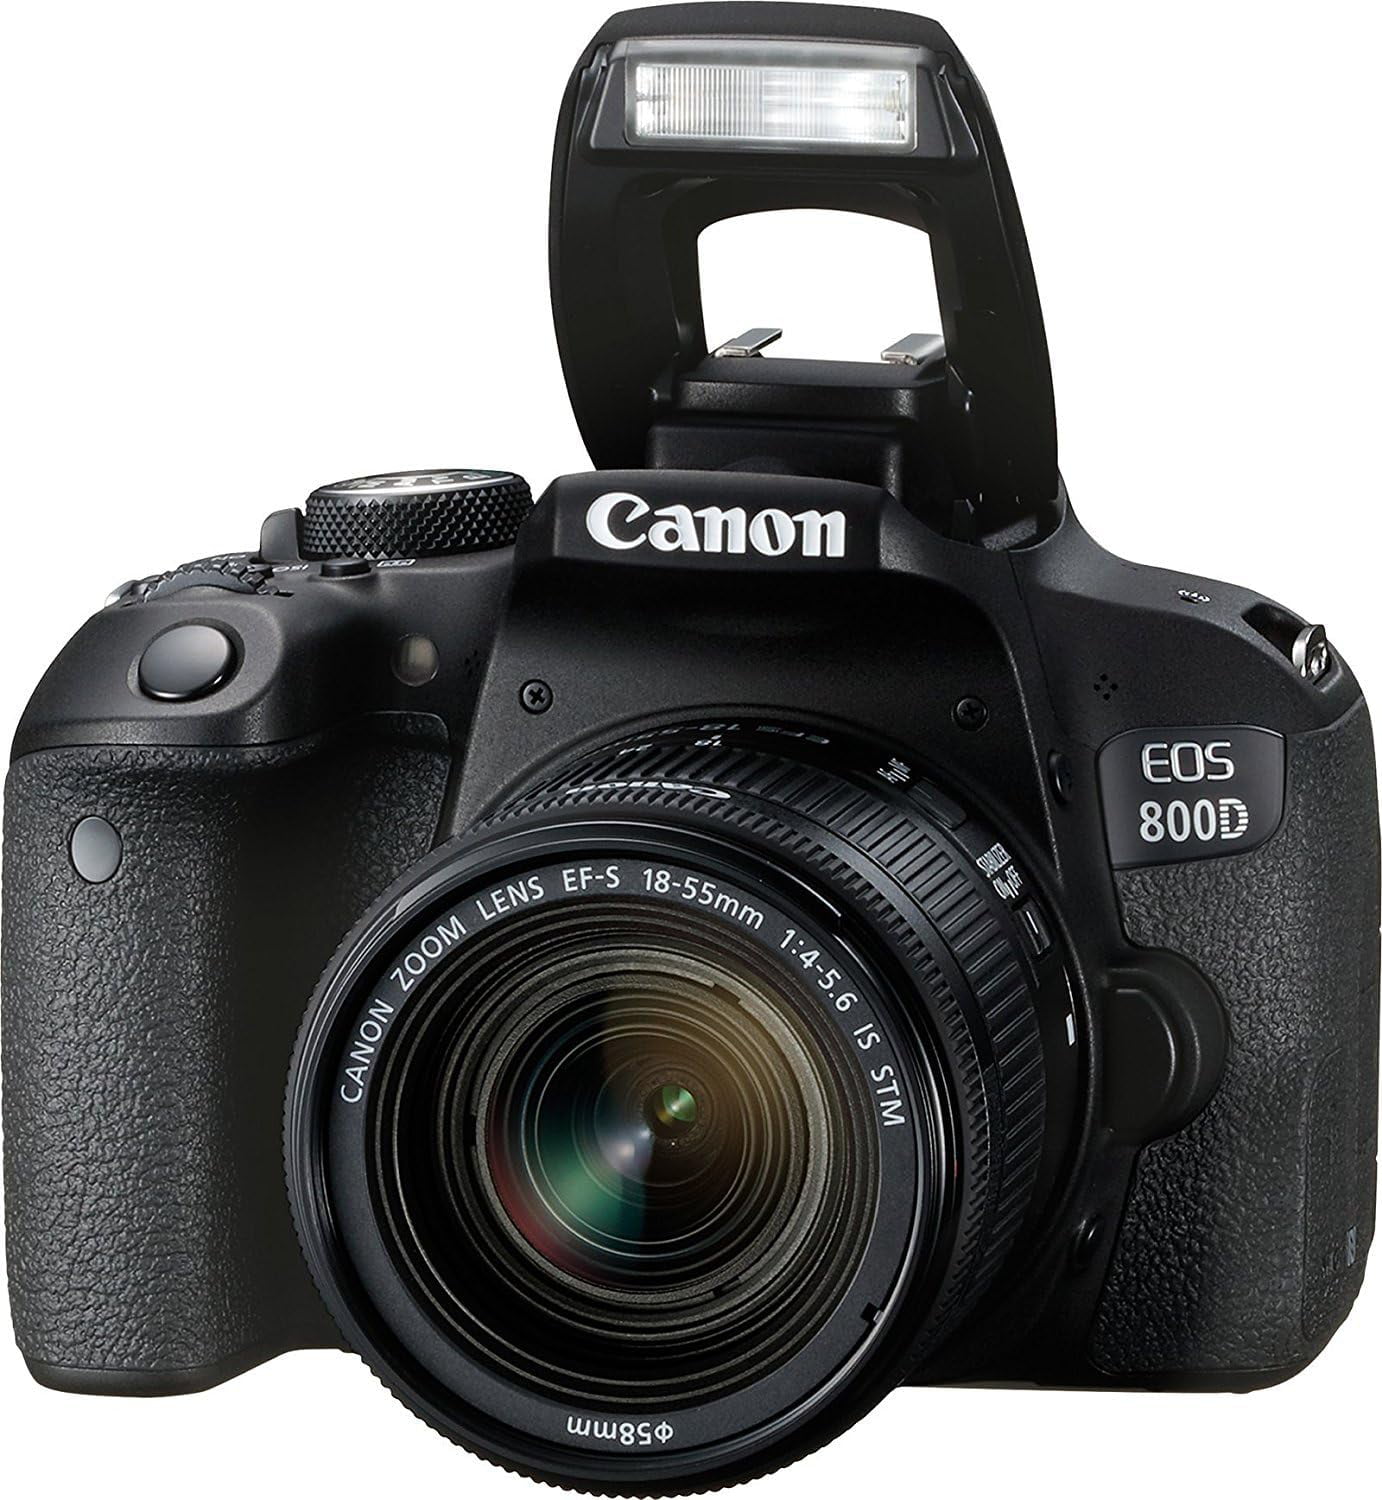 Canon EOS 800D / Rebel T7i DSLR Camera with 18-55mm Lens +